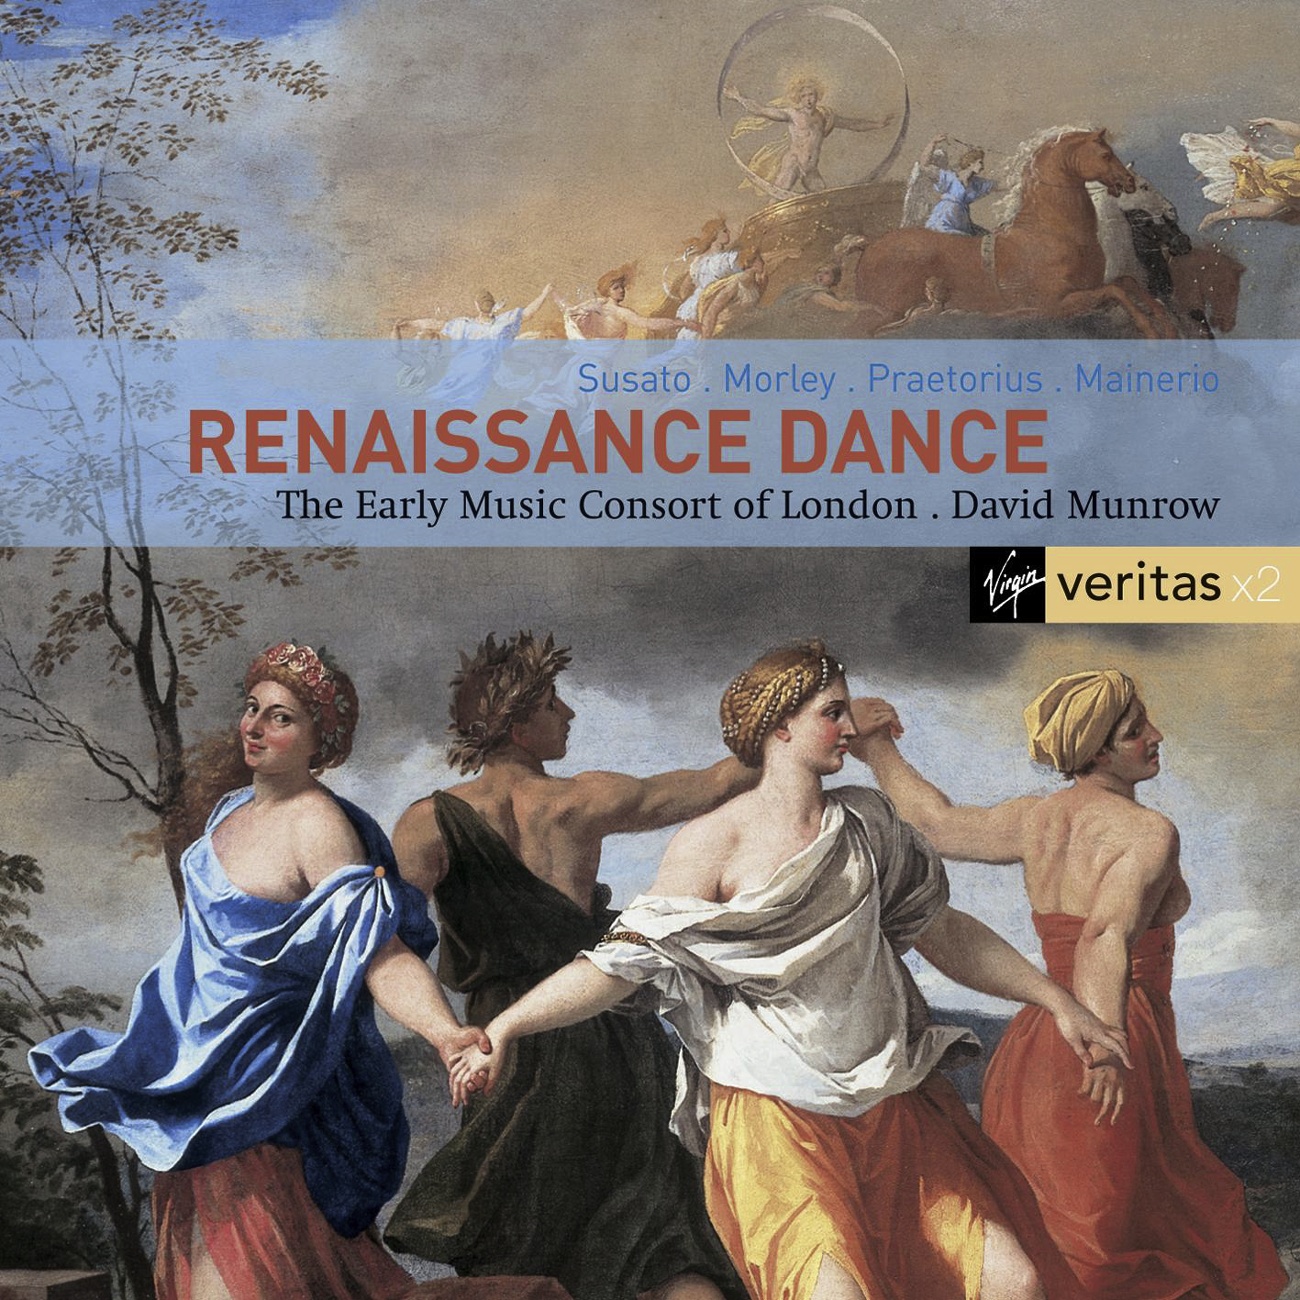 12 dances from The Danseryes (1551) (2005 Digital Remaster): Allemaigne and Recoupe